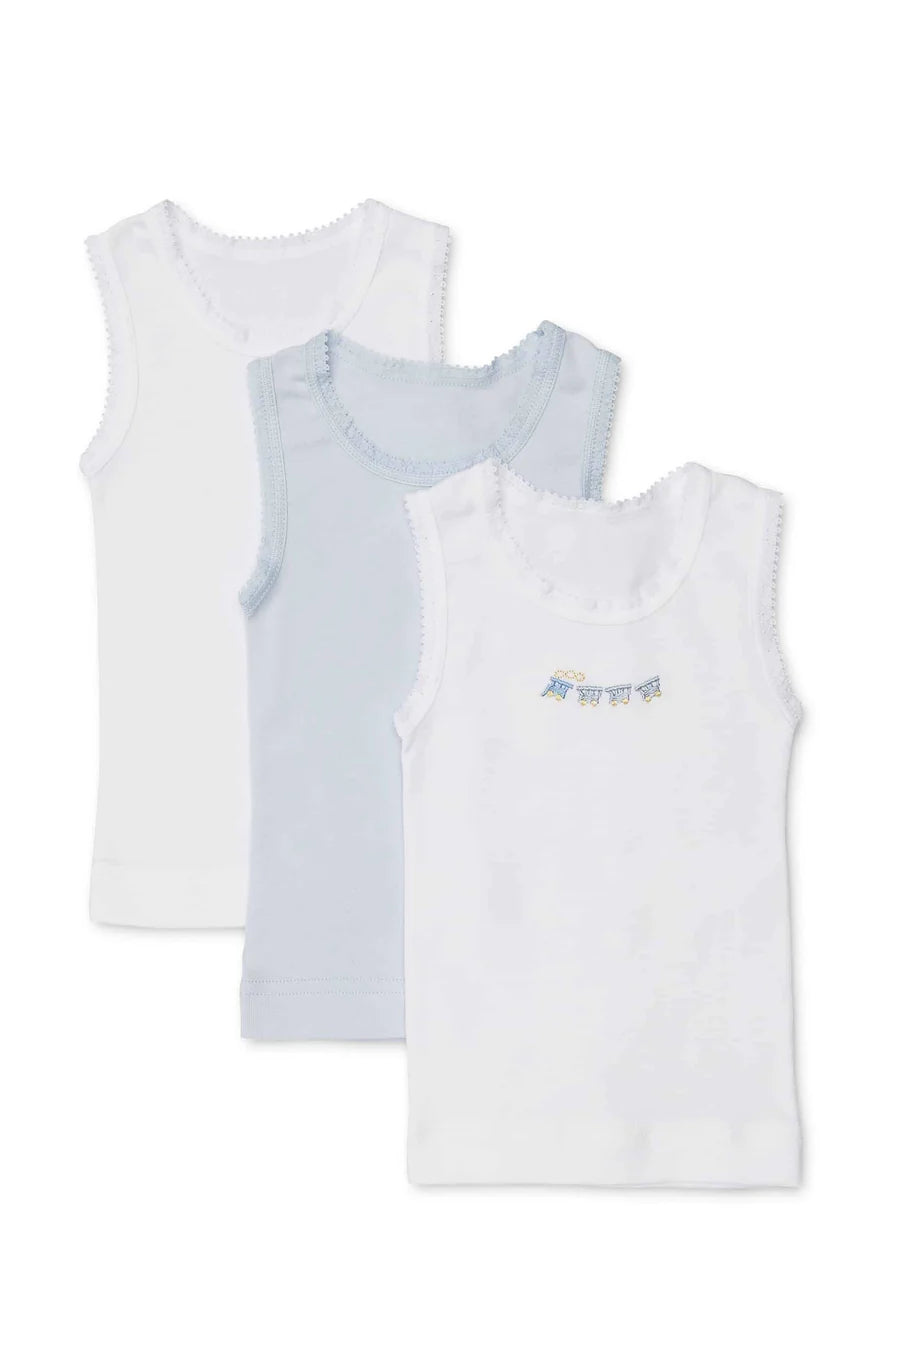 Marquise - Baby Singlets - 3pk White,pink + embroidered white or White,Blue + embroidered White